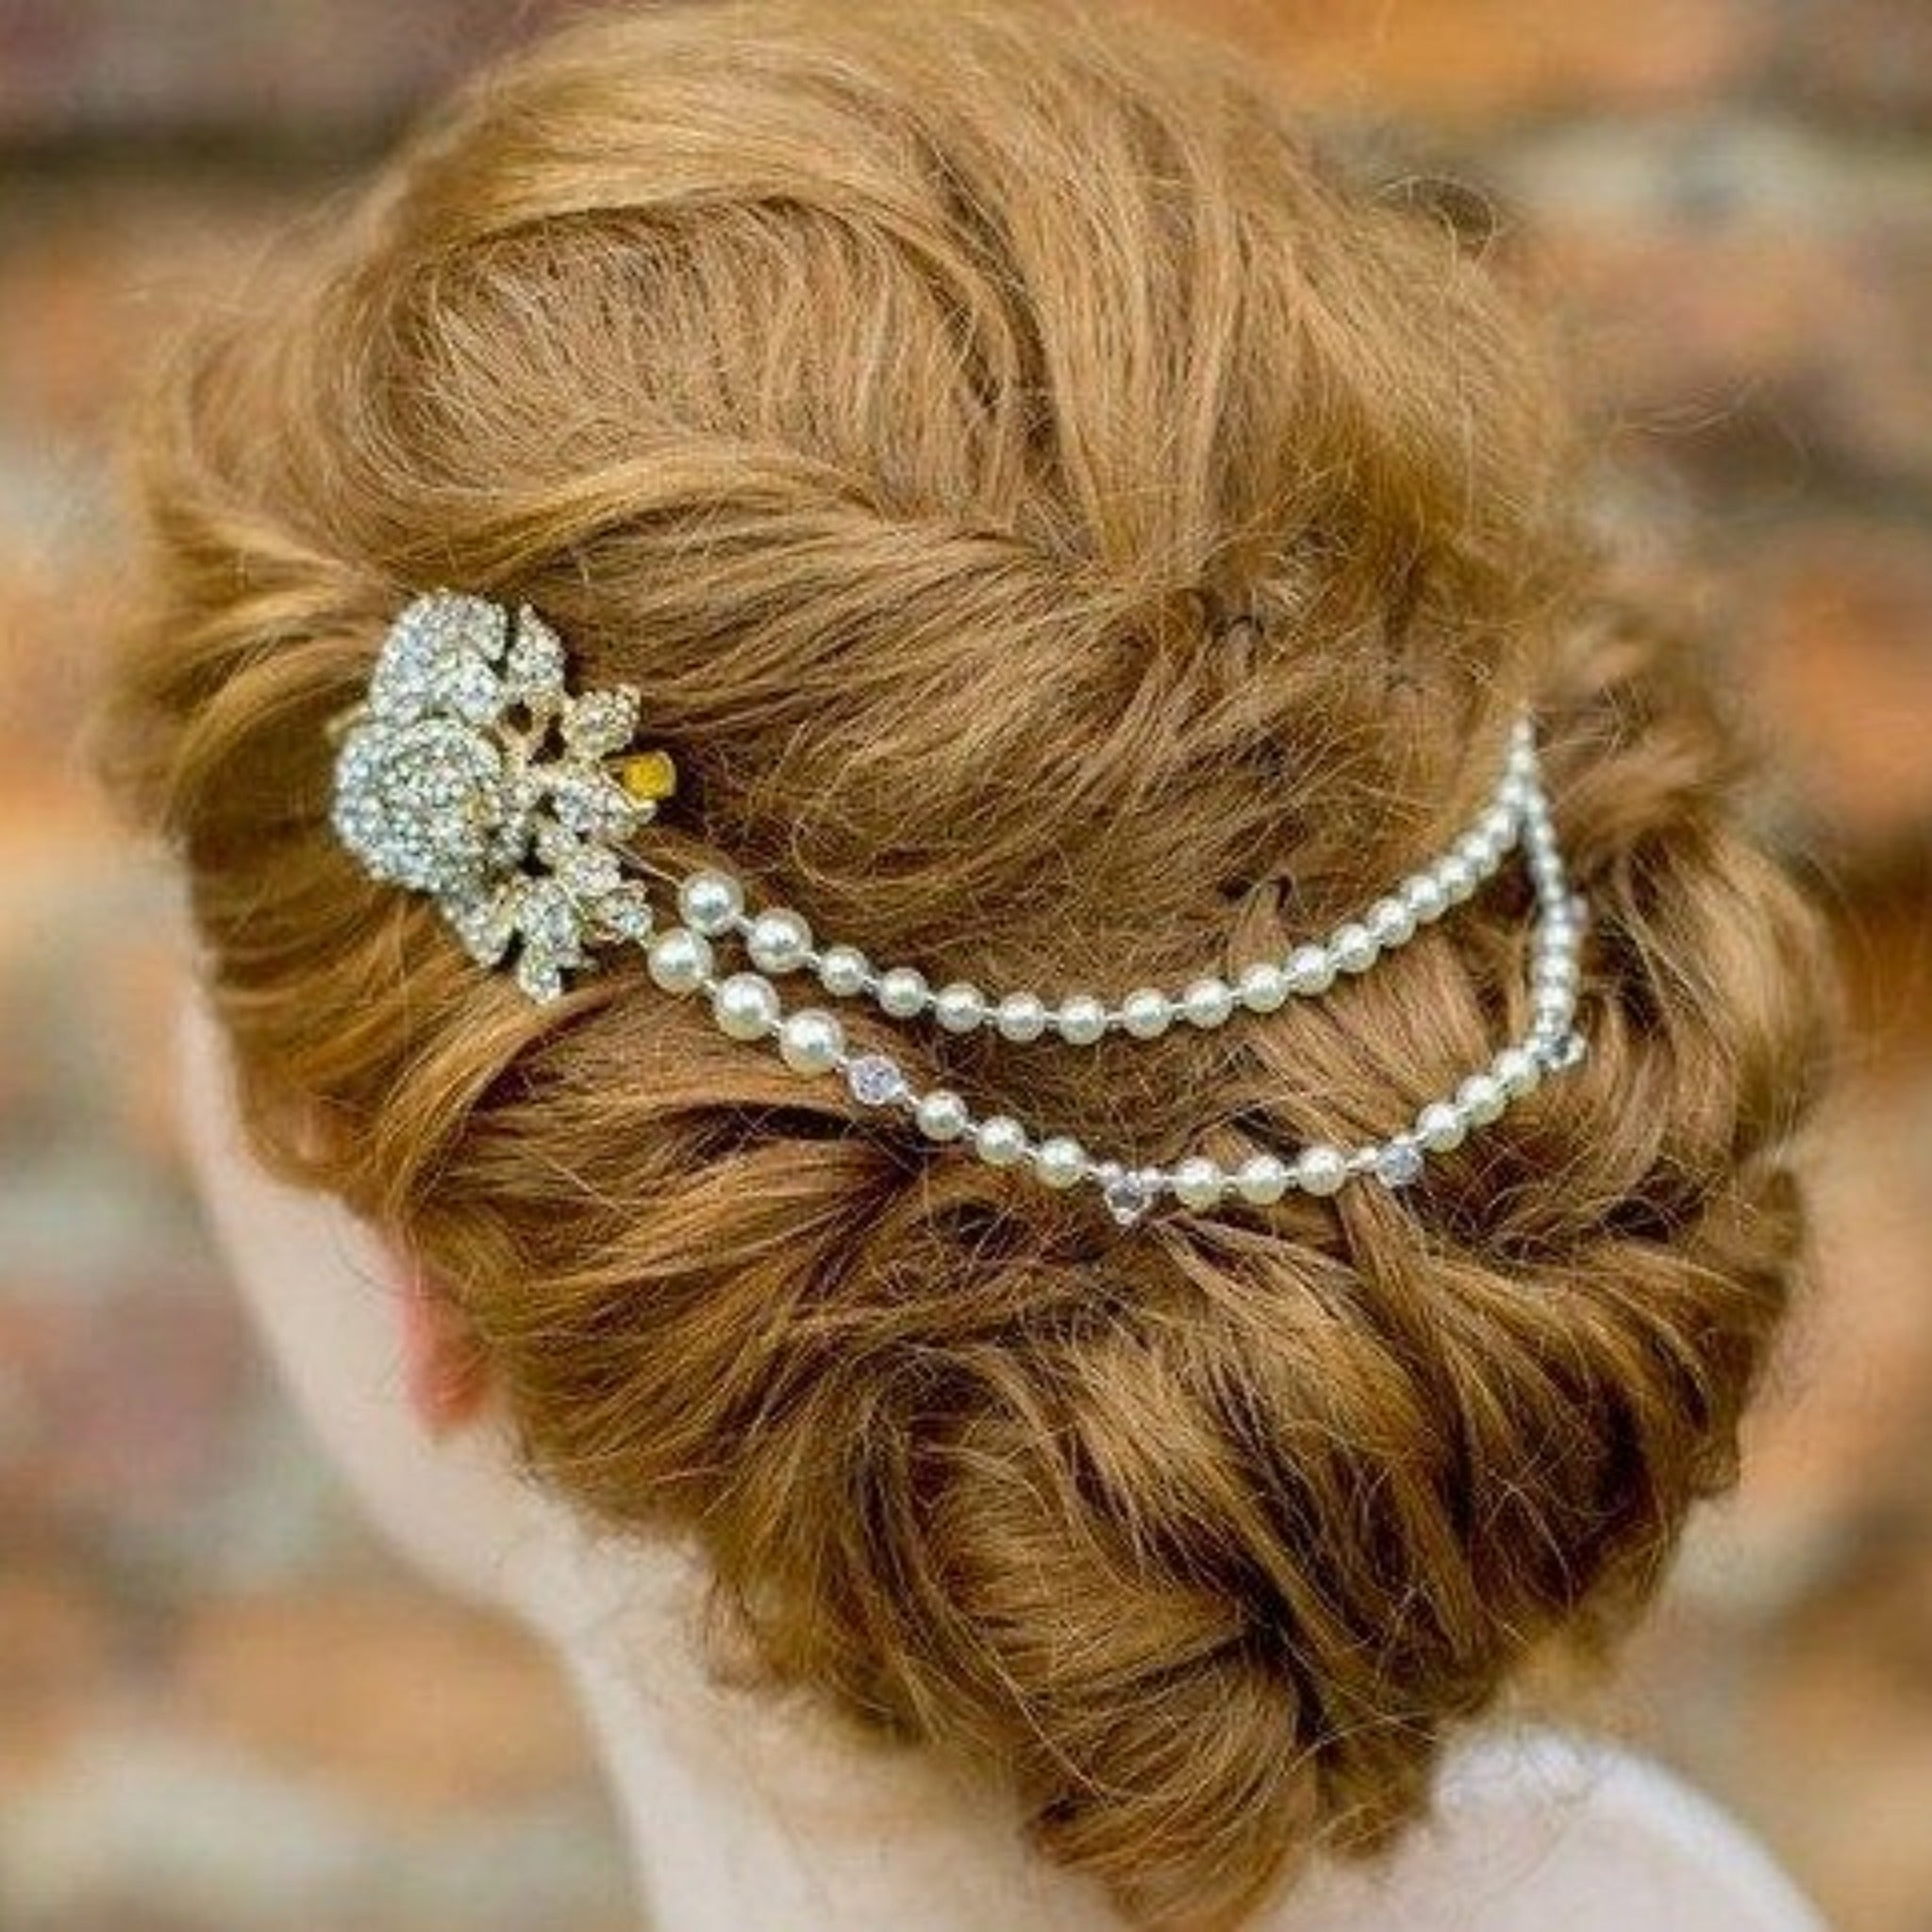 Pearl/Crystal Hair Drapes - Gold Vintage Style Hair Draped Pearls And Crystal Rose Features, Anita Gold.